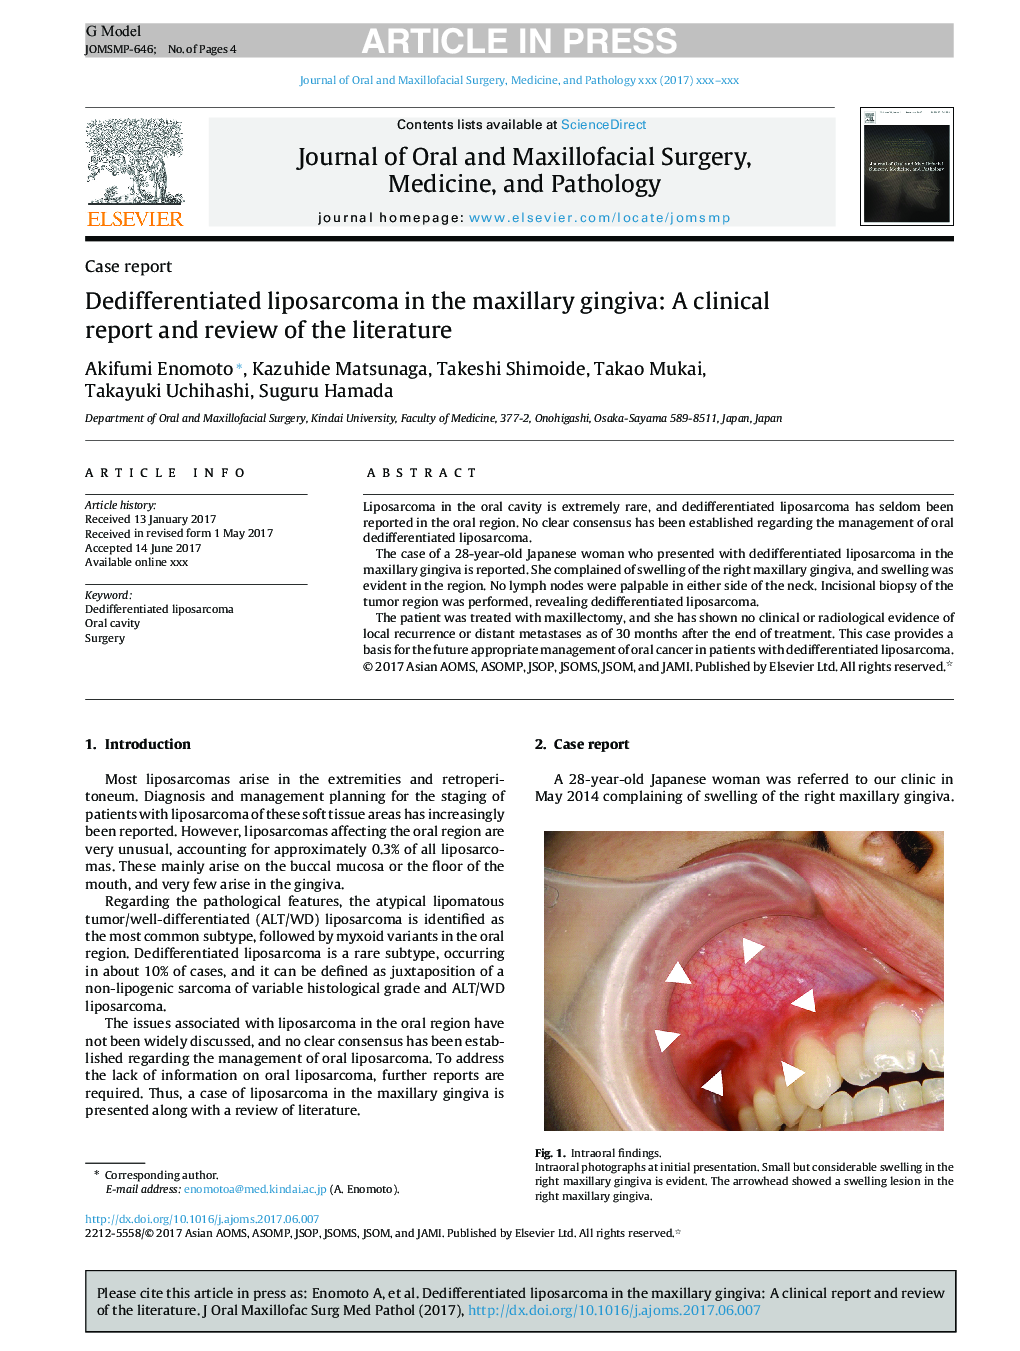 Dedifferentiated liposarcoma in the maxillary gingiva: A clinical report and review of the literature